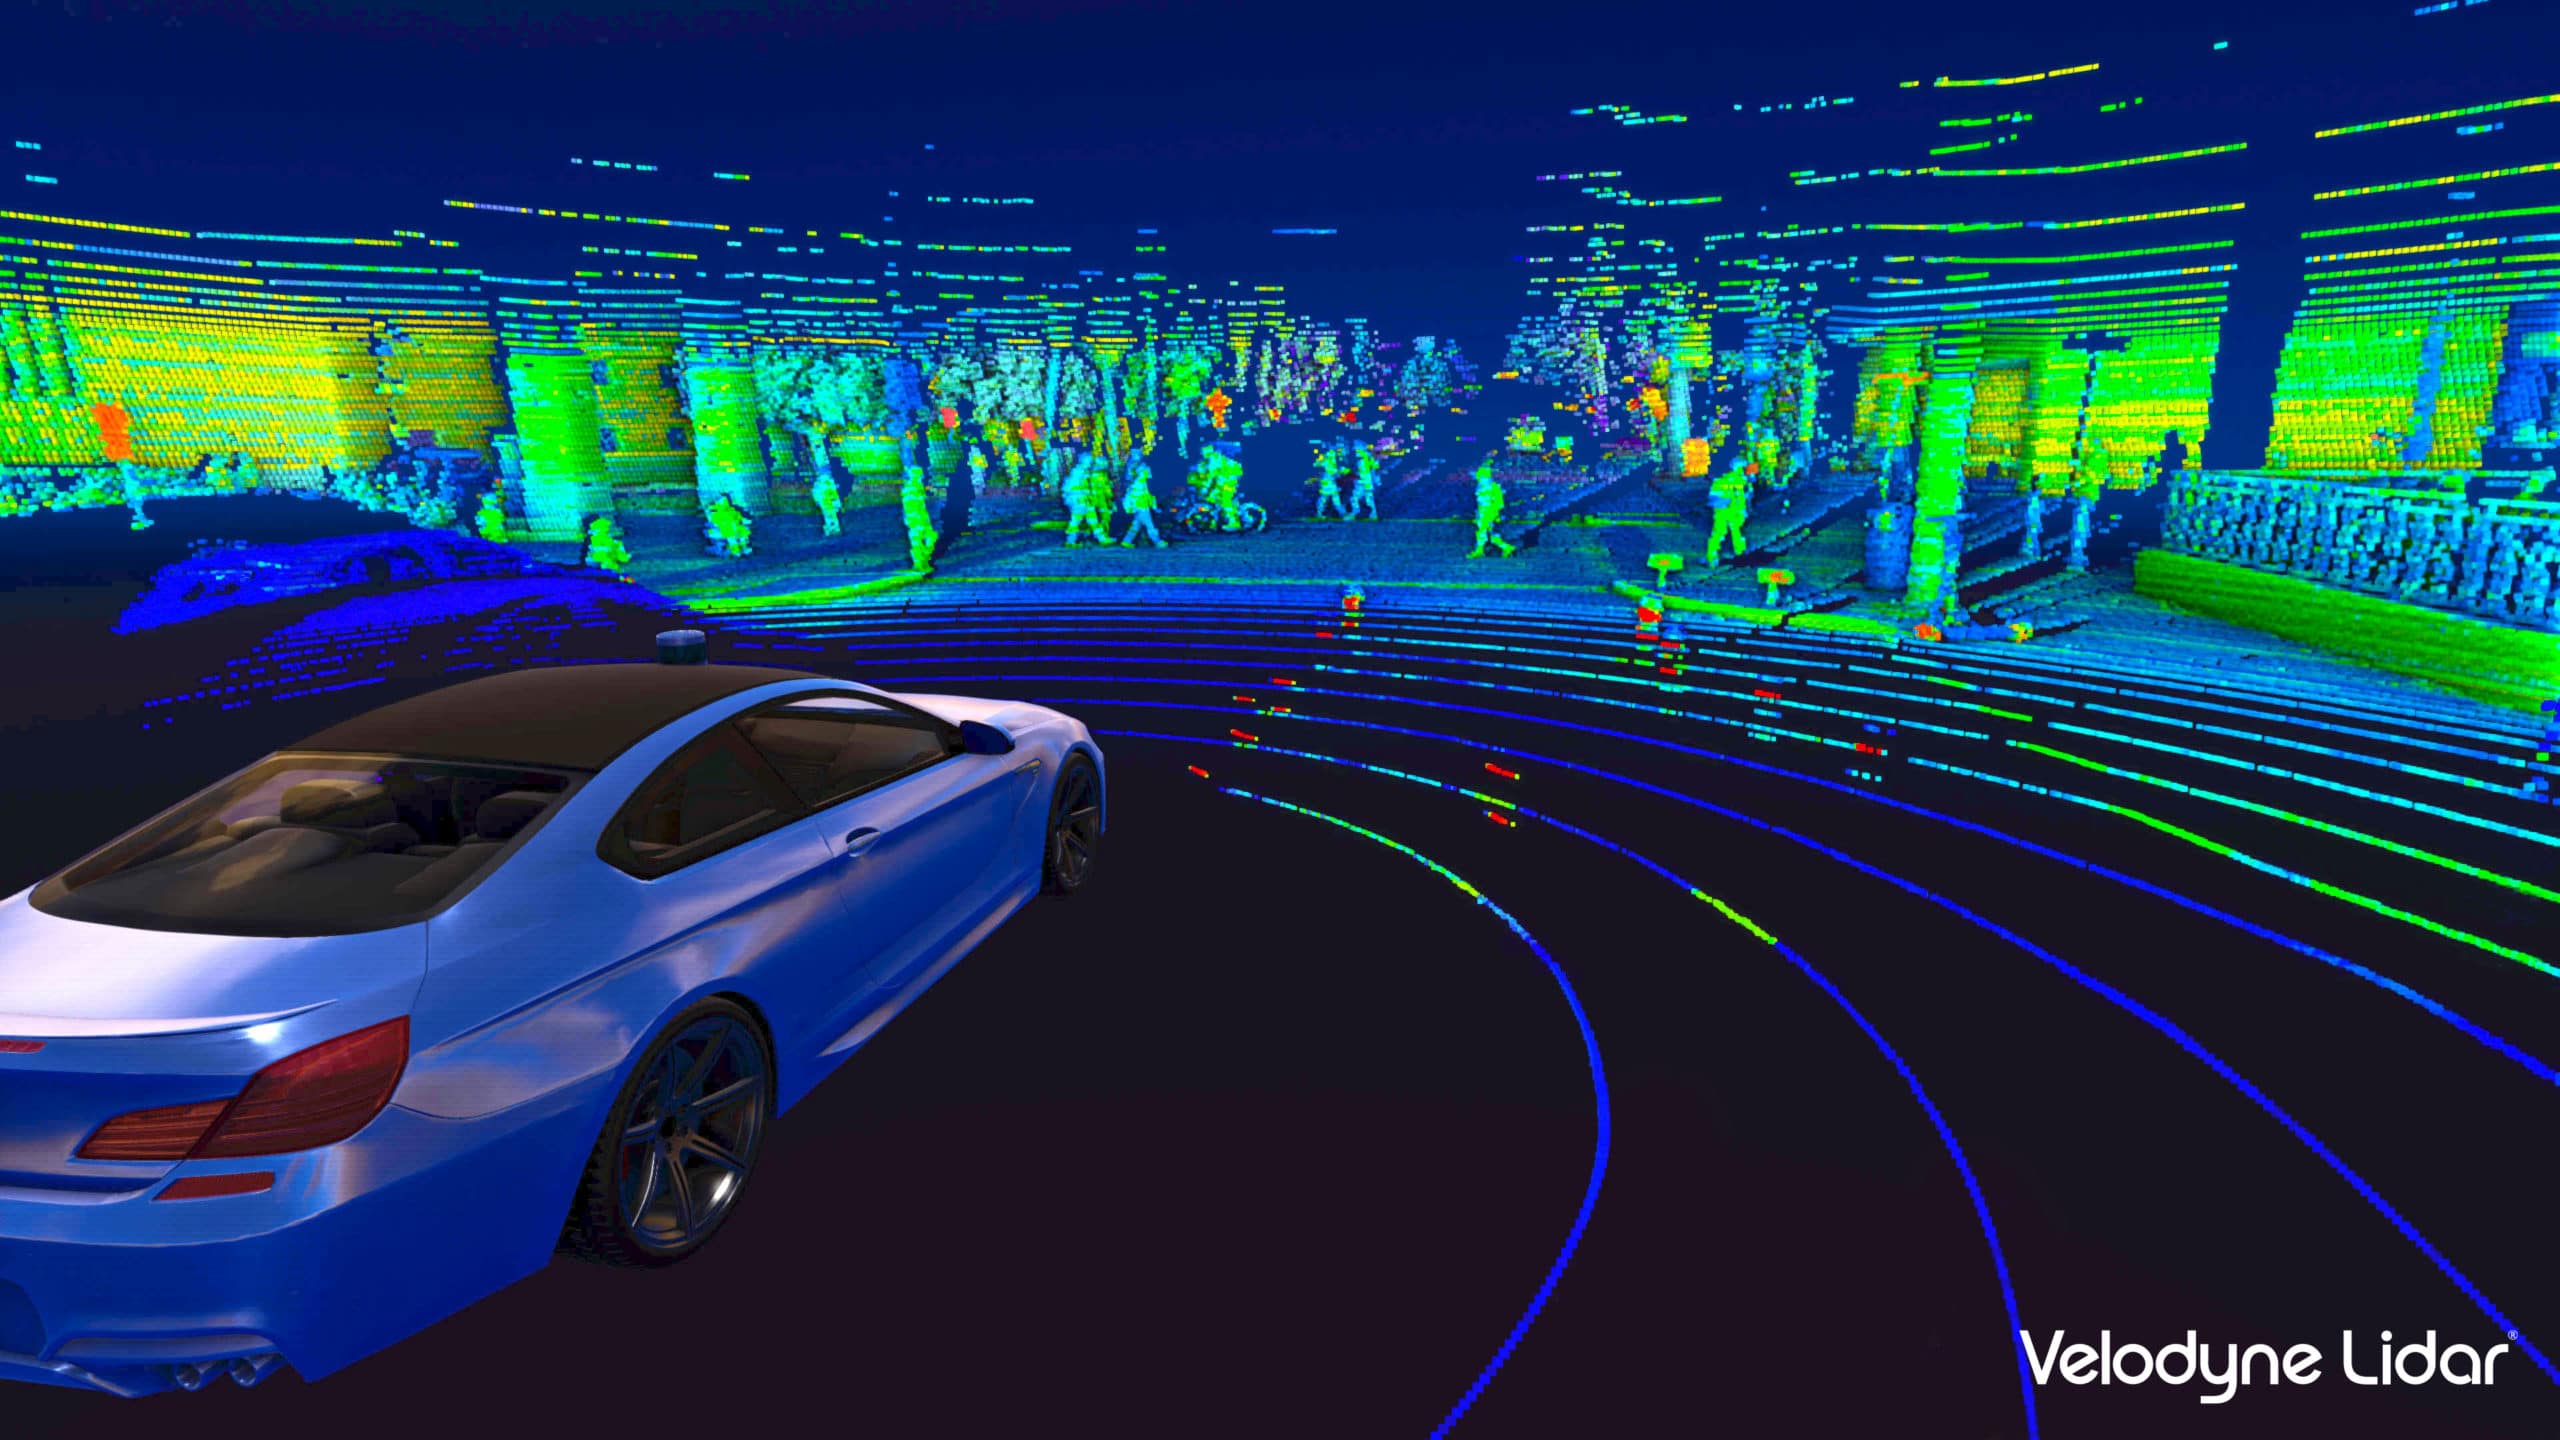 Pedestrian Safety Systems Can be Improved with Lidar